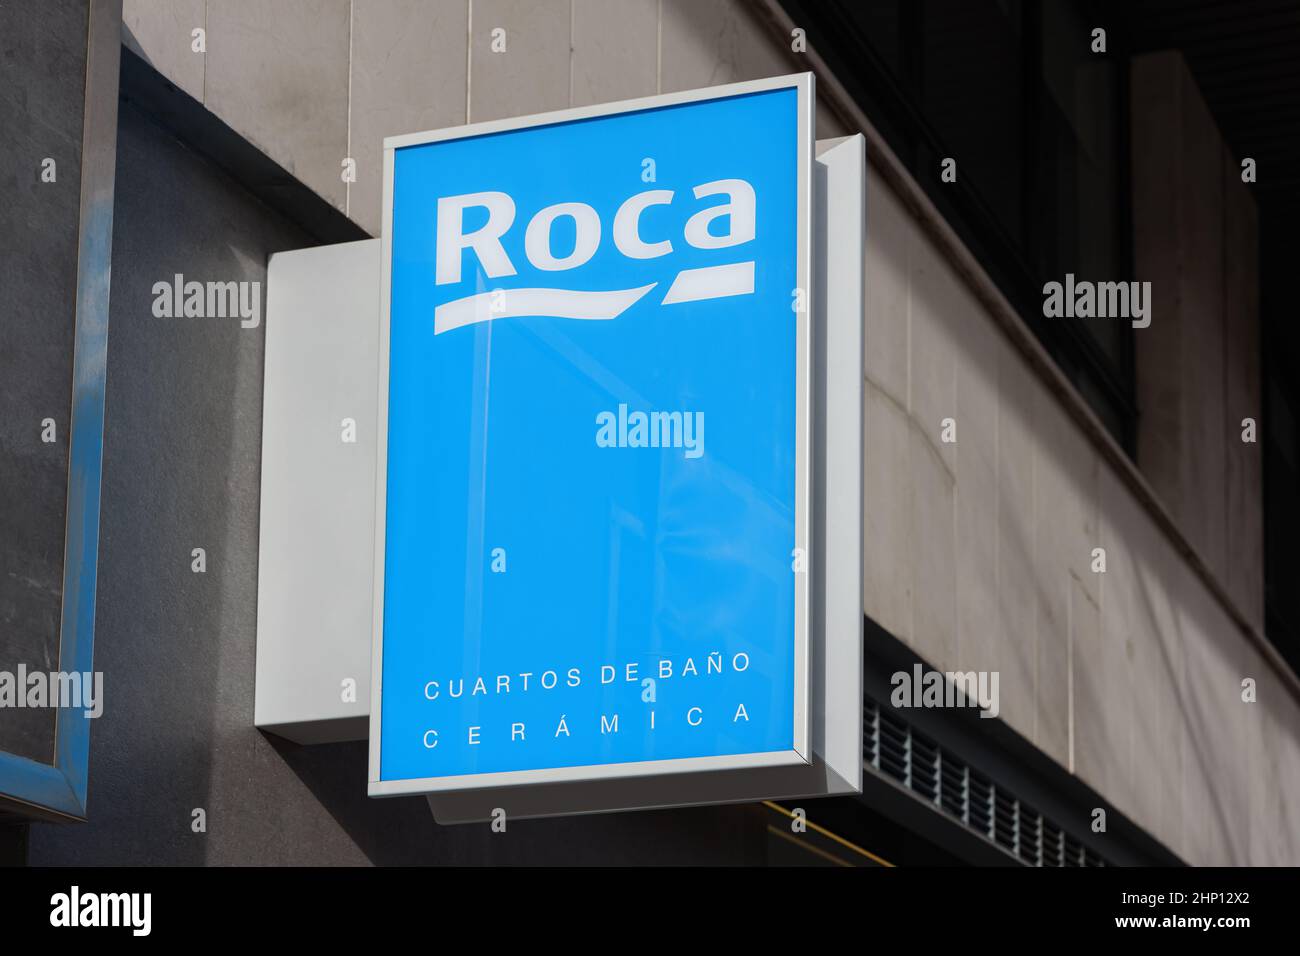 VALENCIA, SPAIN - FEBRUARY 15, 2022: Roca is a Spanish producer of sanitary ware products Stock Photo